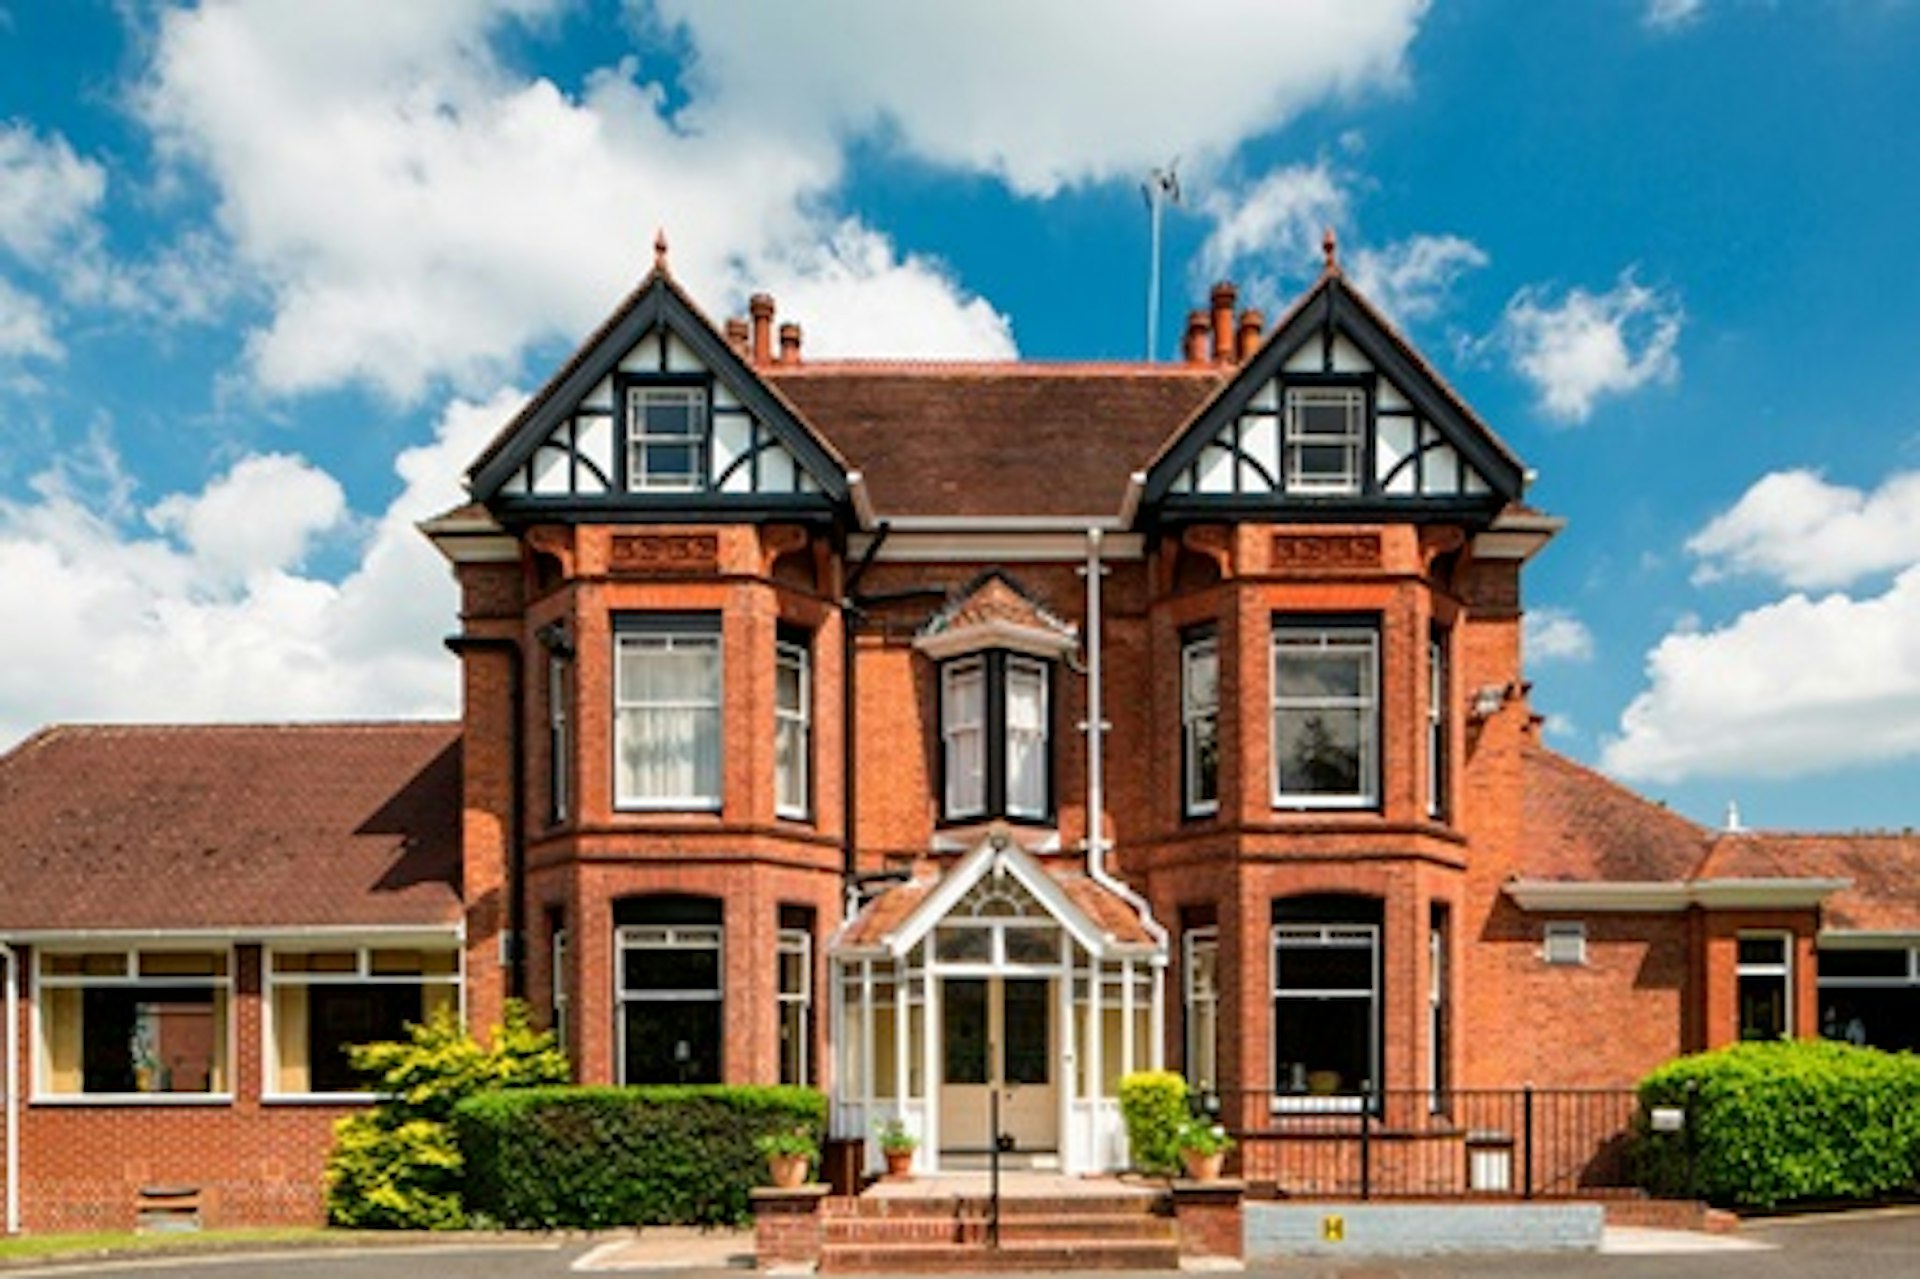 One Night Break for Two at the Mercure Bewdley The Heath Hotel 1